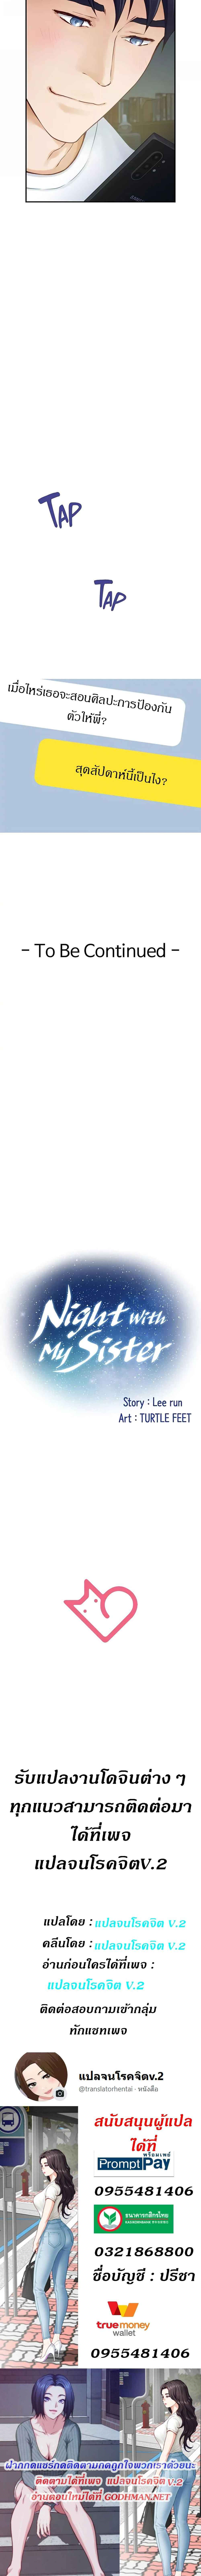 Night With My Sister9